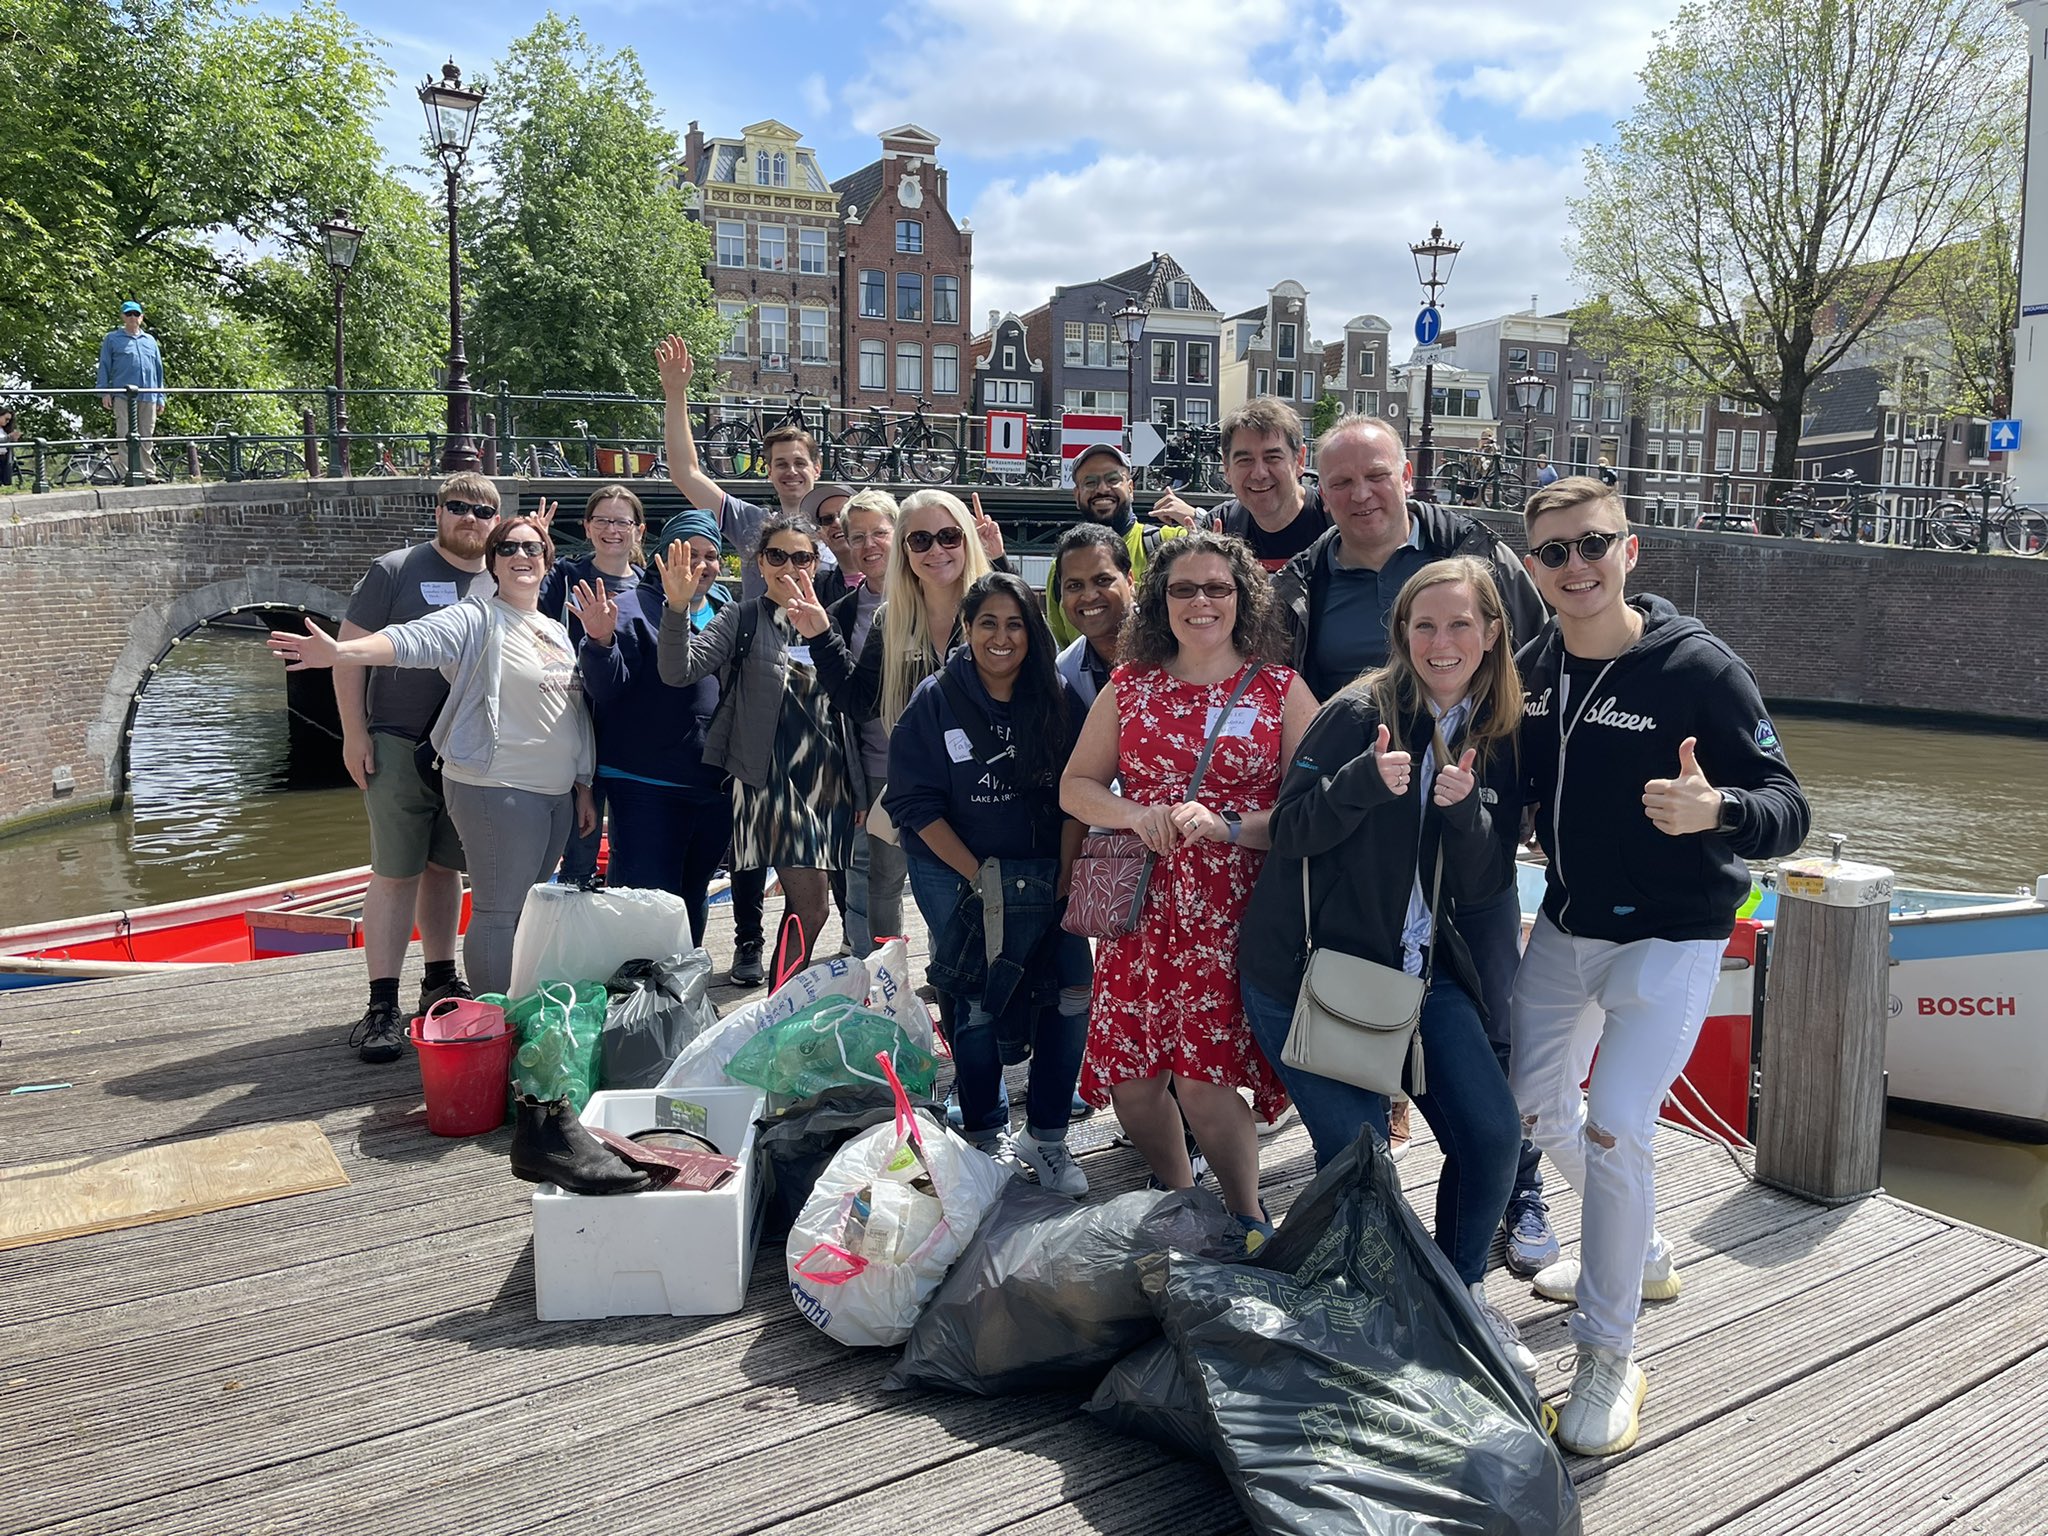 Various people active in the Salesforce ecosystem surrounded by bags of rubbish that they have collected from Amsterdam's canals